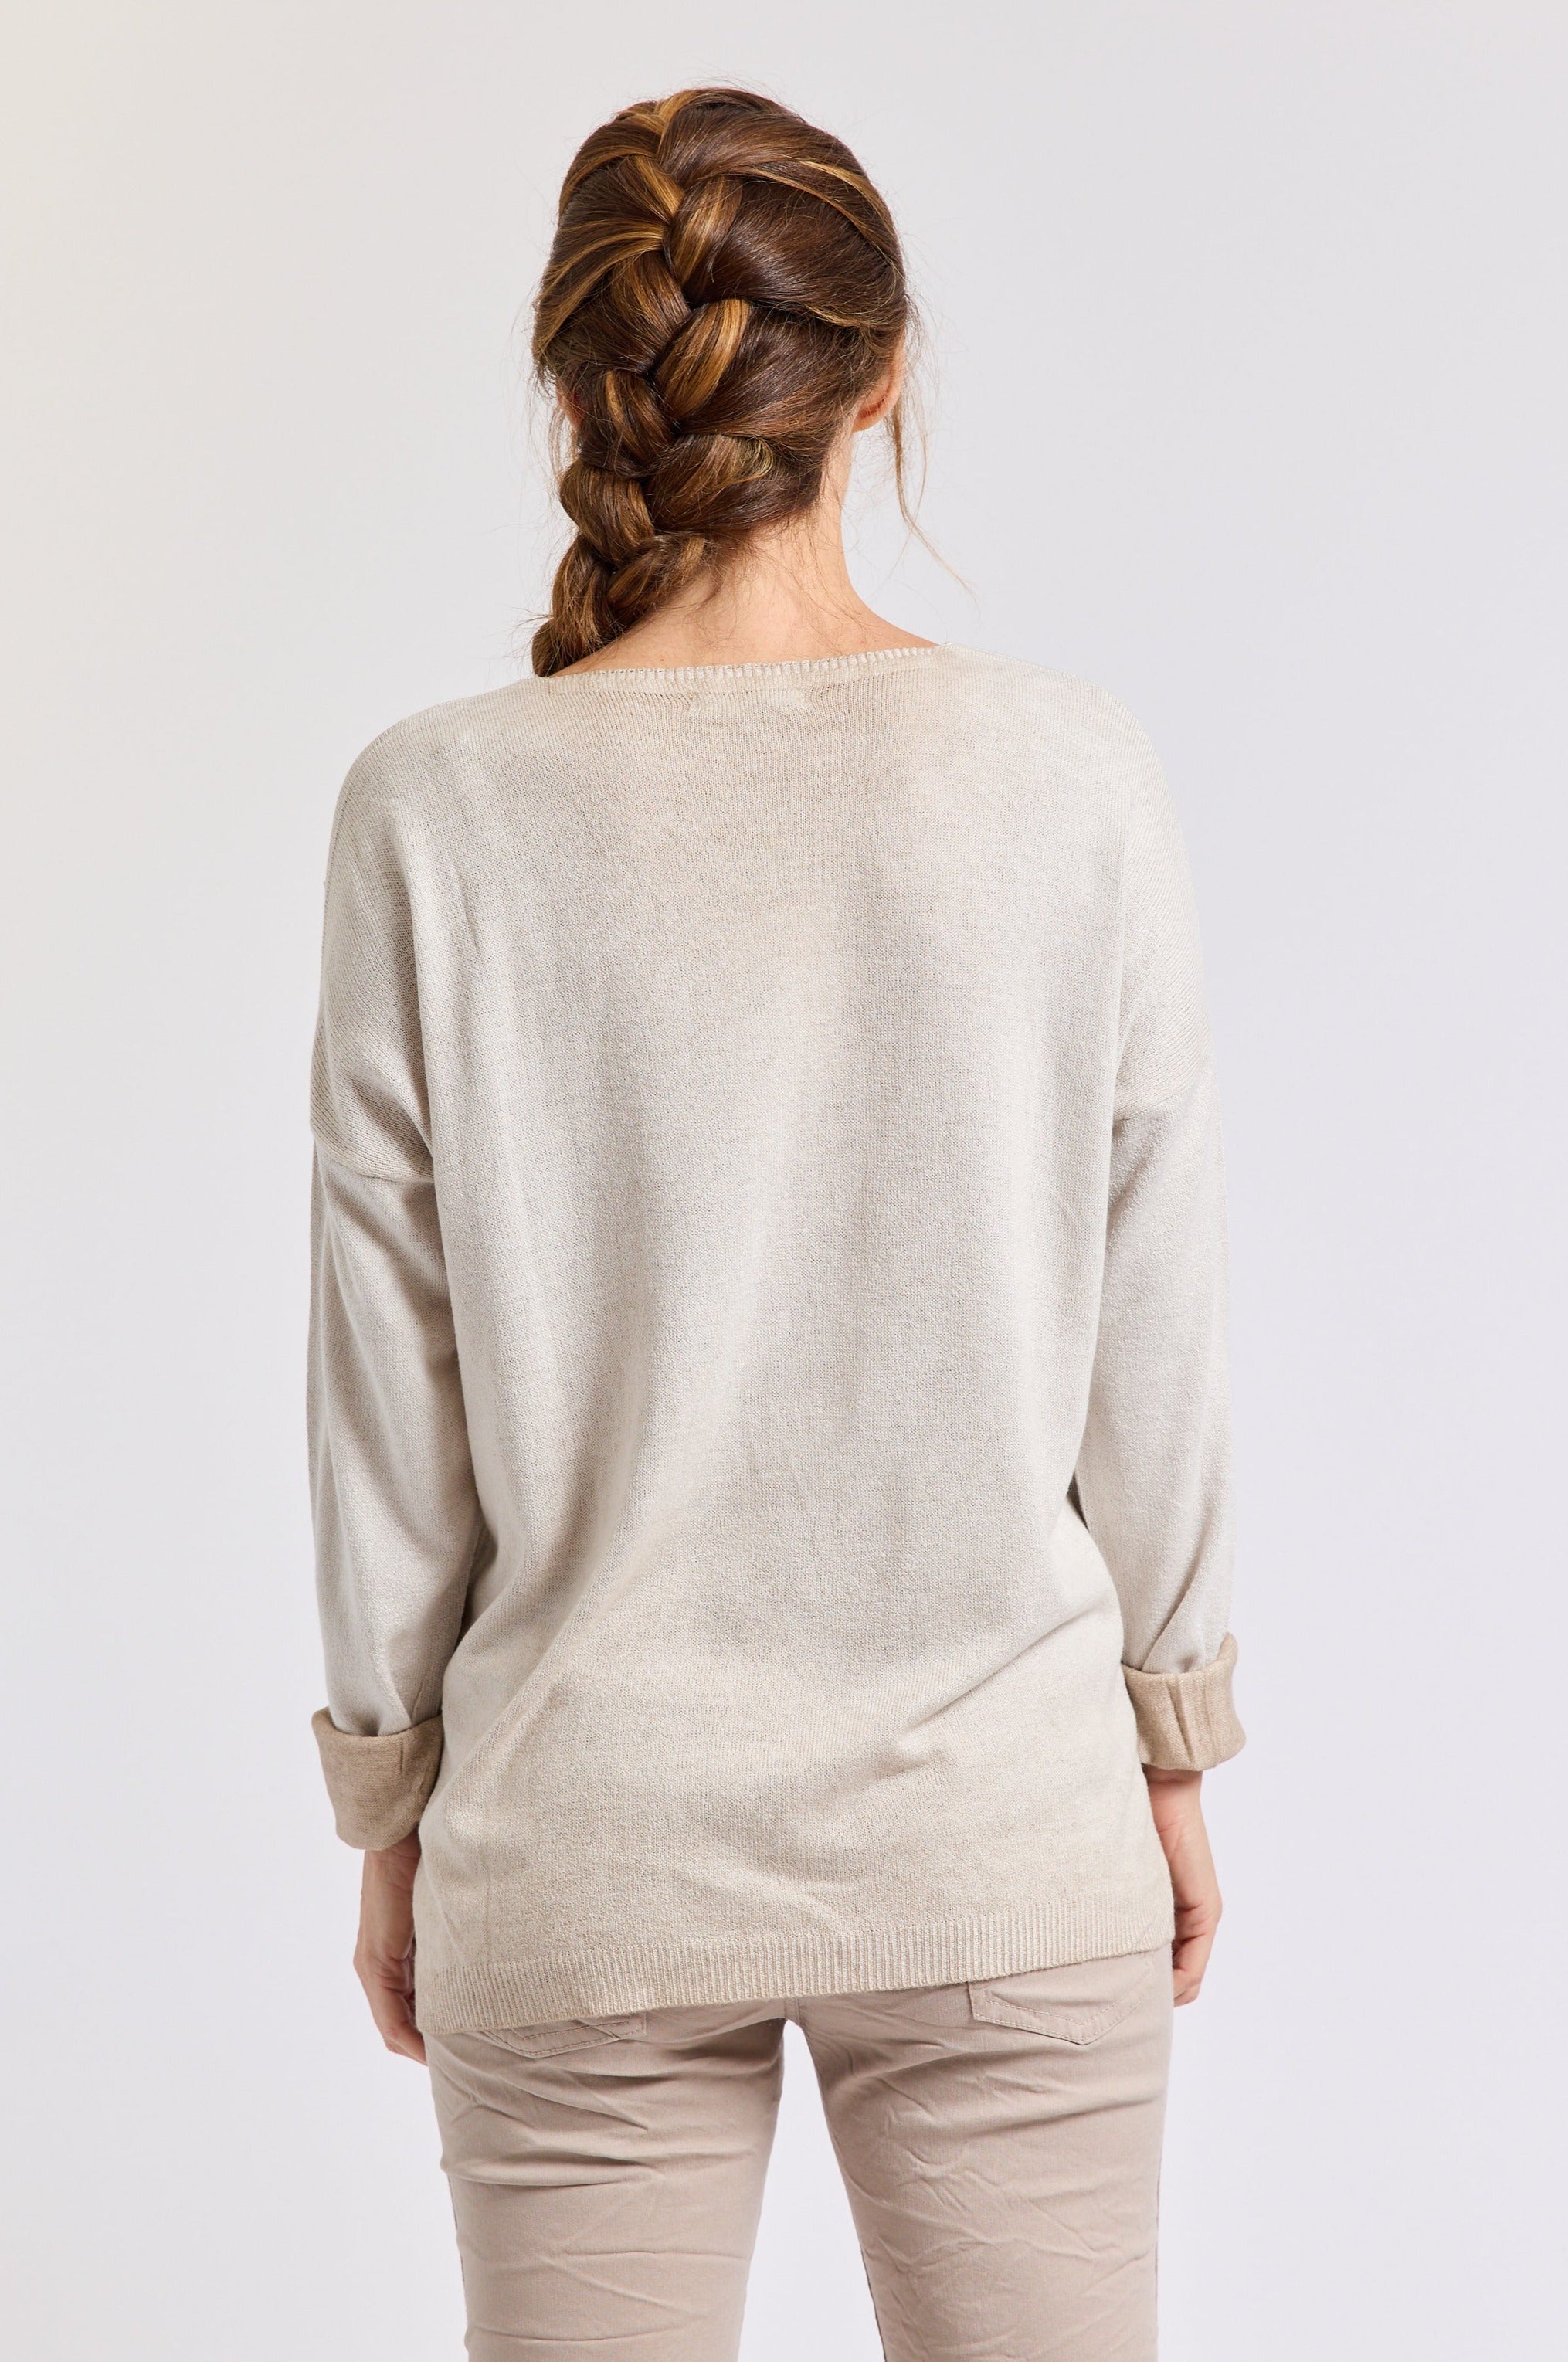 Shinny Front Sweater (Eight Colors) - Jacqueline B Clothing